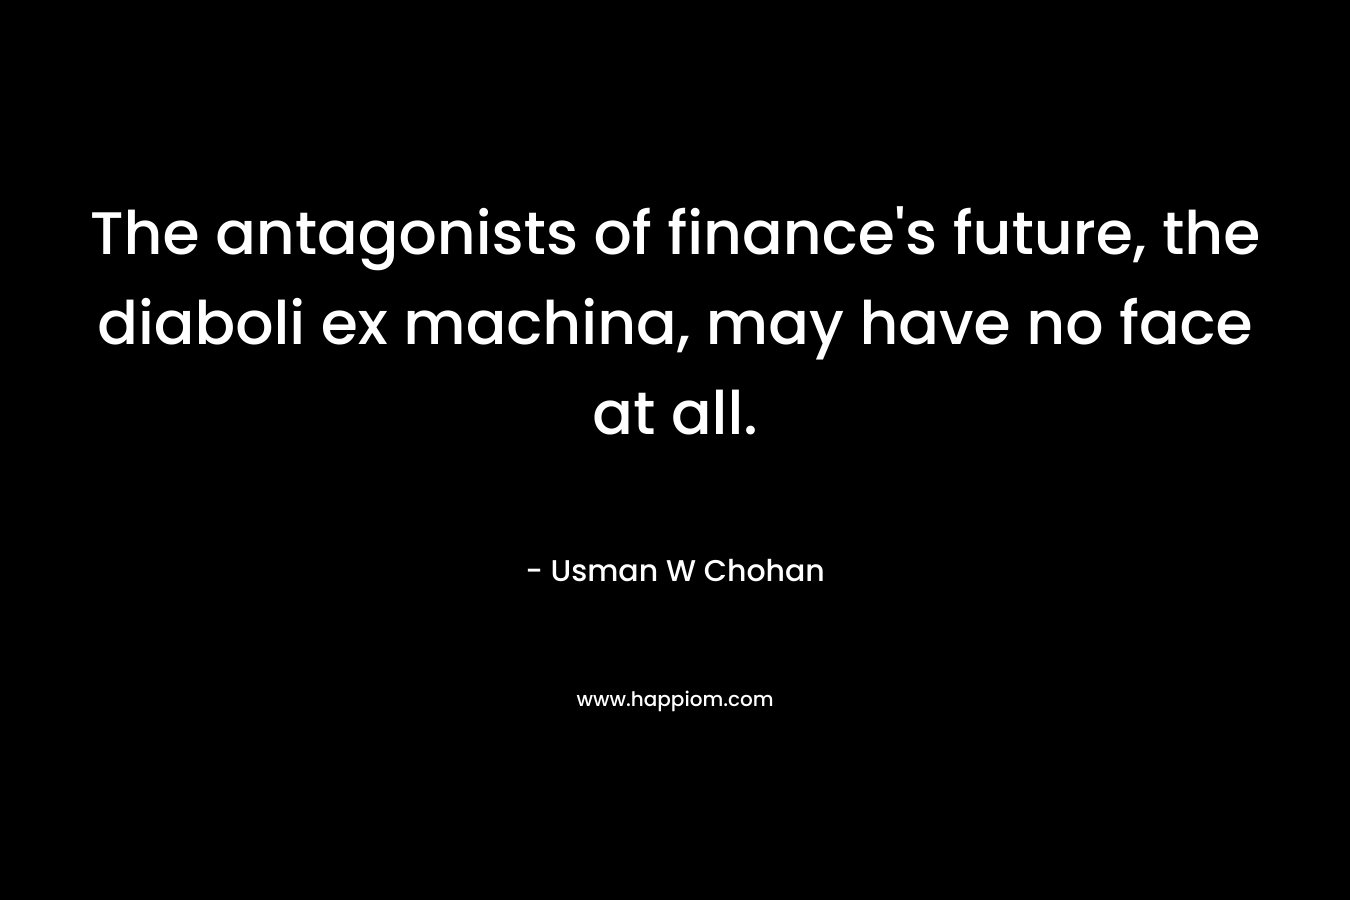 The antagonists of finance's future, the diaboli ex machina, may have no face at all.